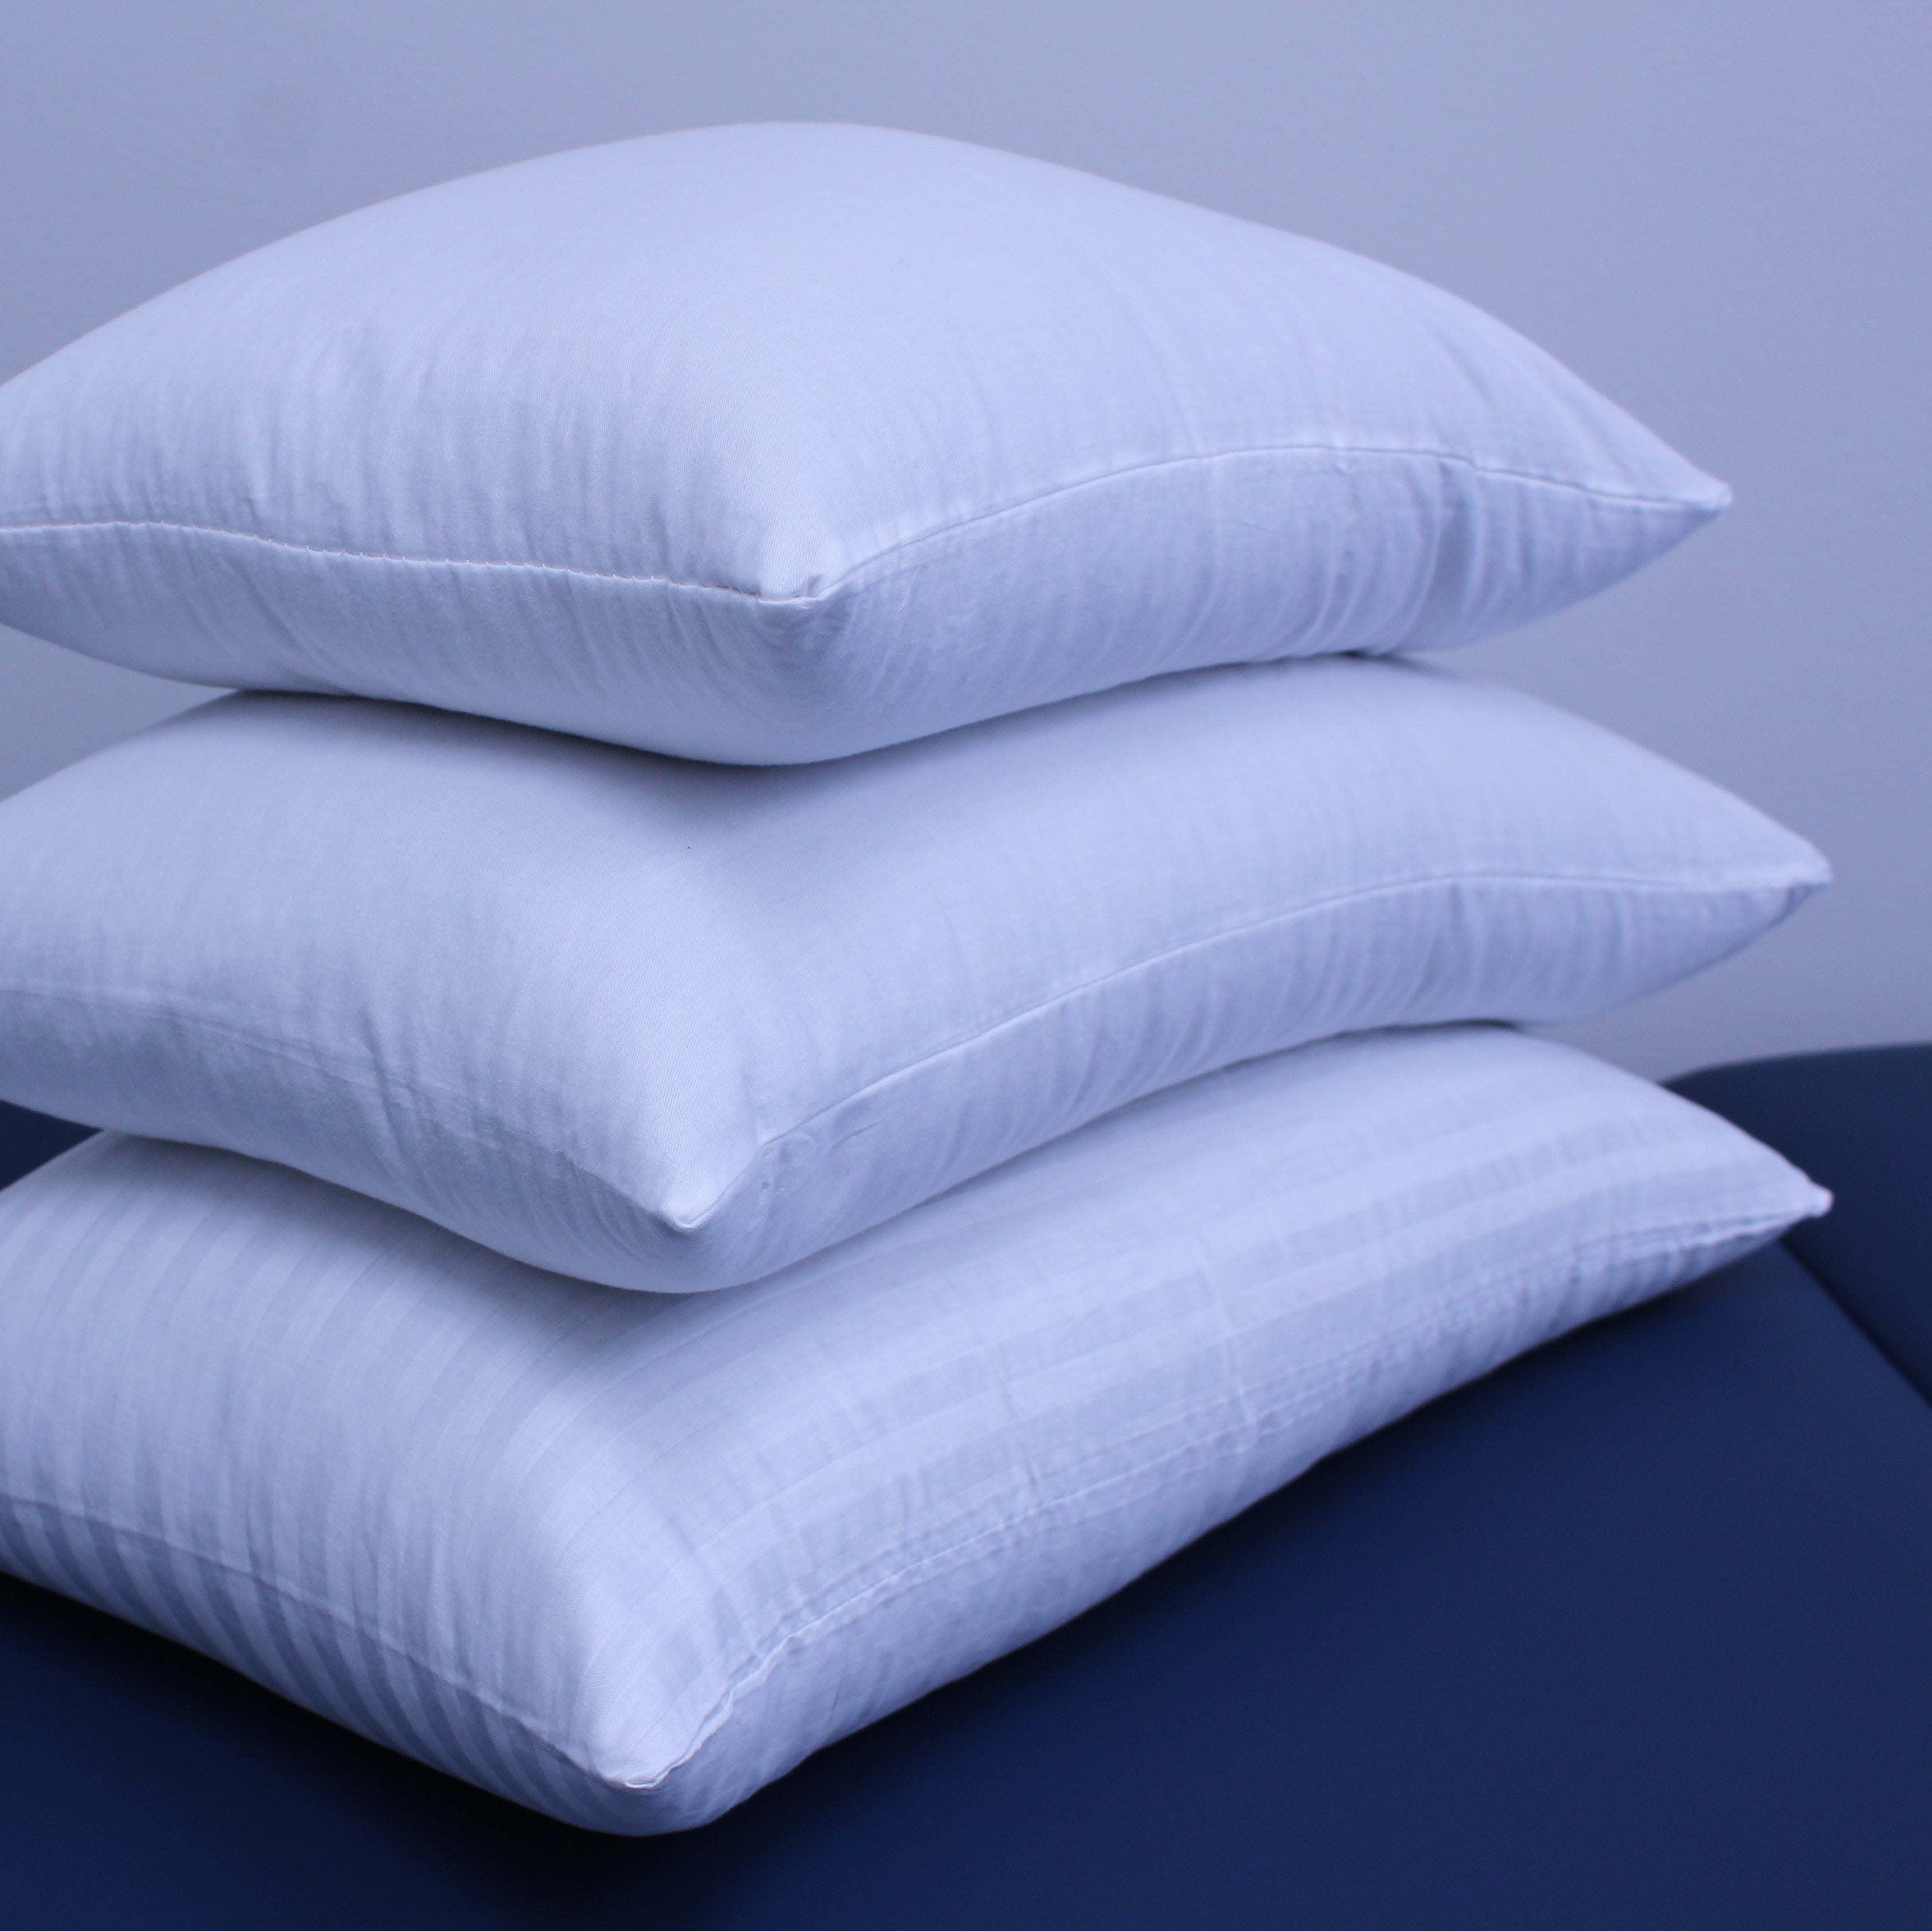 Pillow - Professionally Designed for Neck & Shoulder Pain Relief